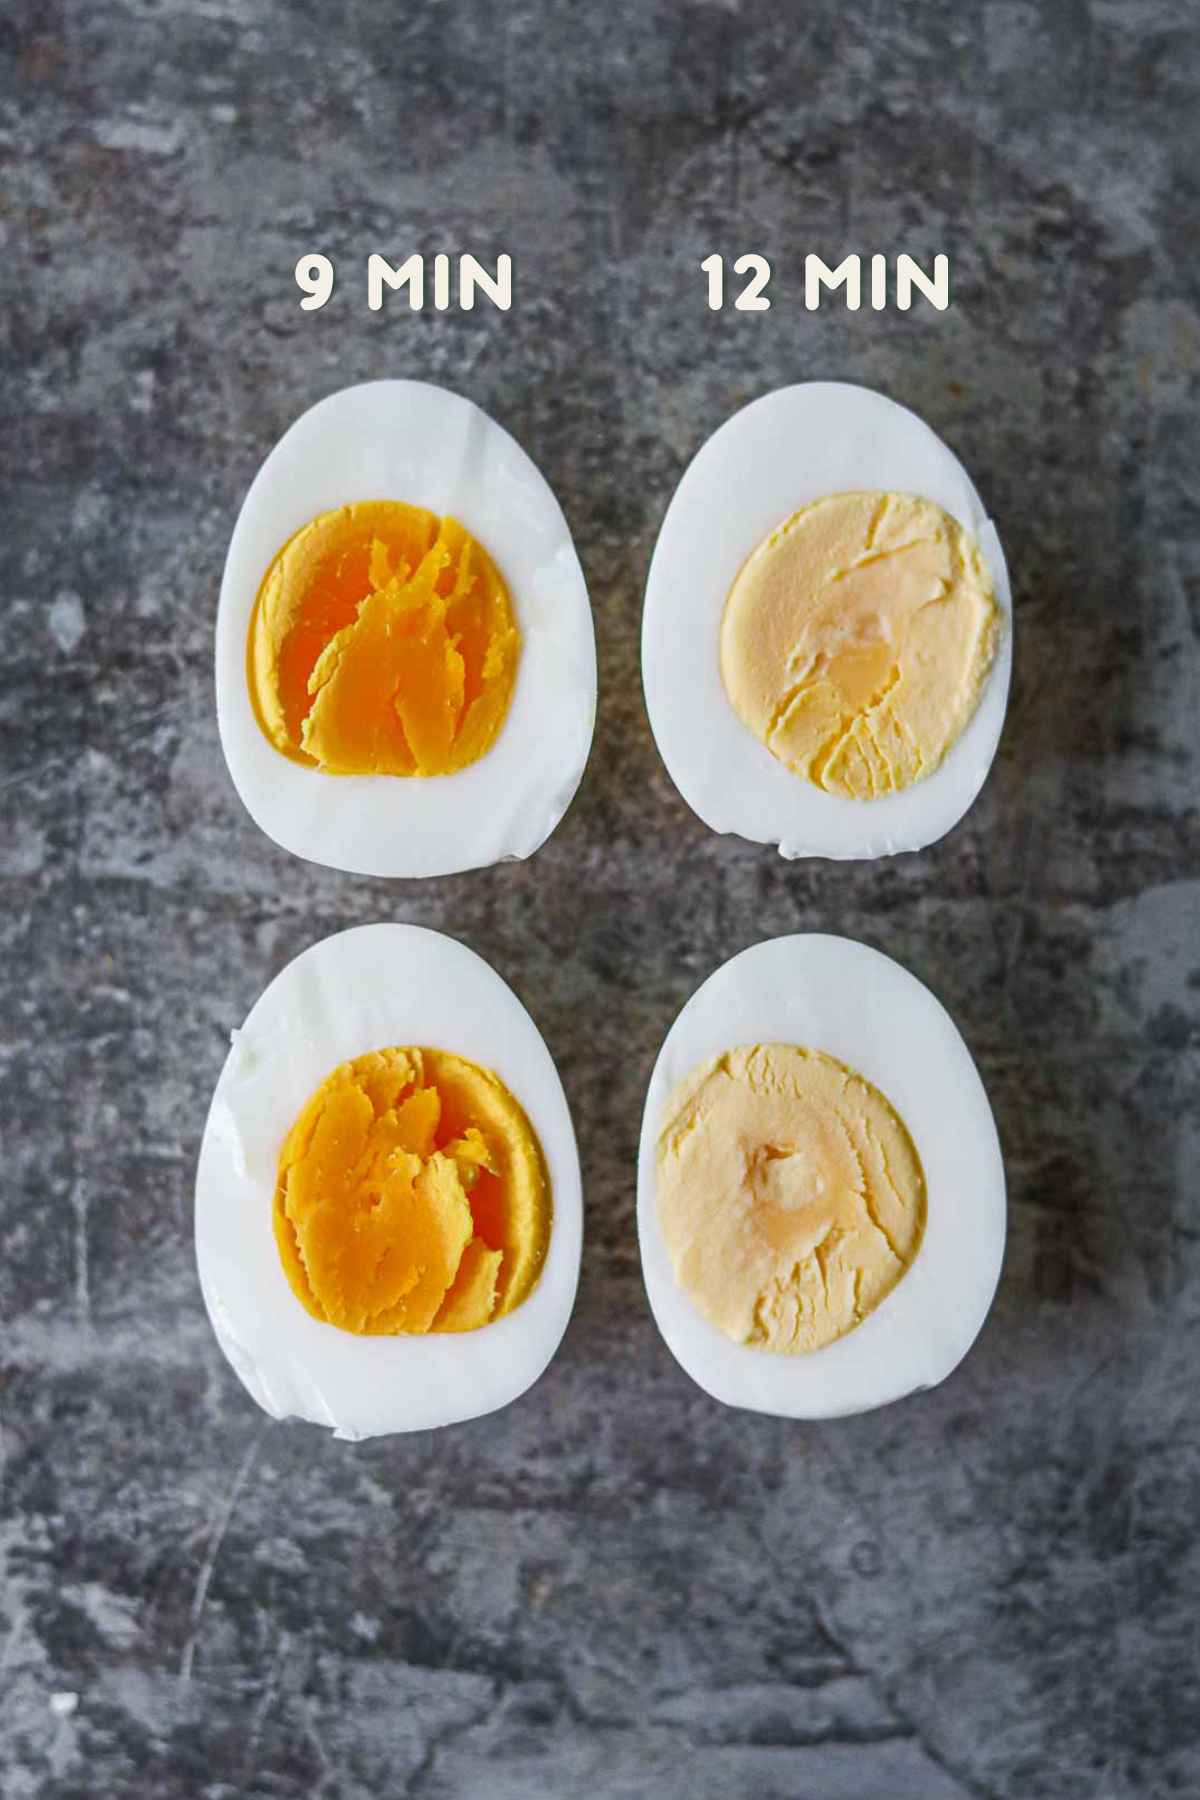 9 minute verus 12 minute perfect fool-proof hard boiled eggs with different yolks.